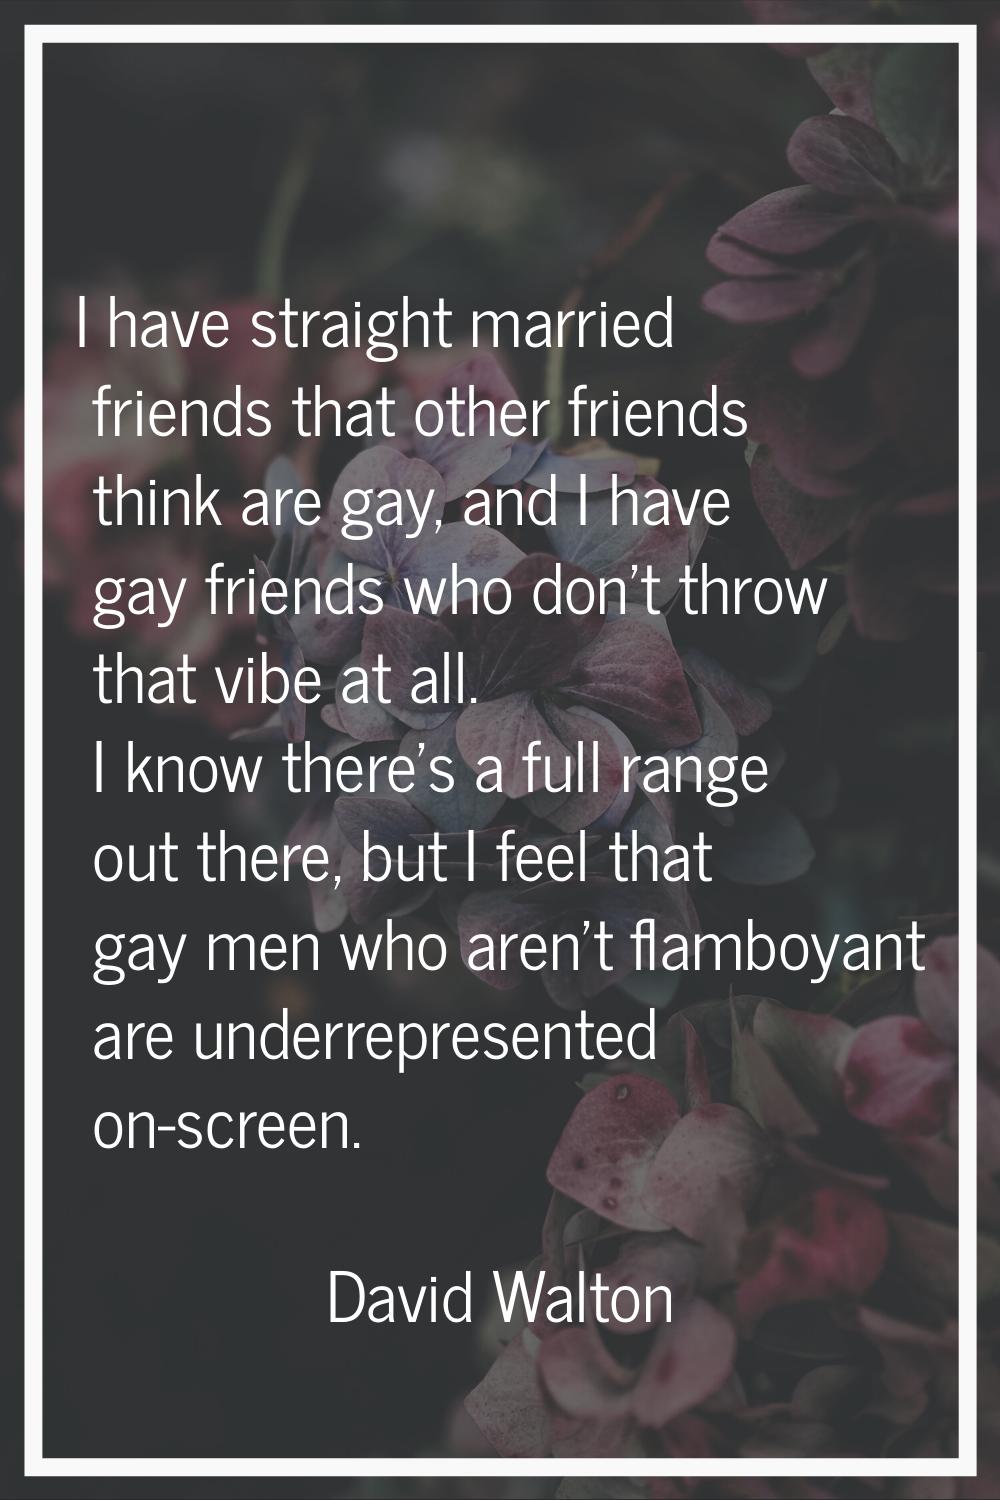 I have straight married friends that other friends think are gay, and I have gay friends who don't 